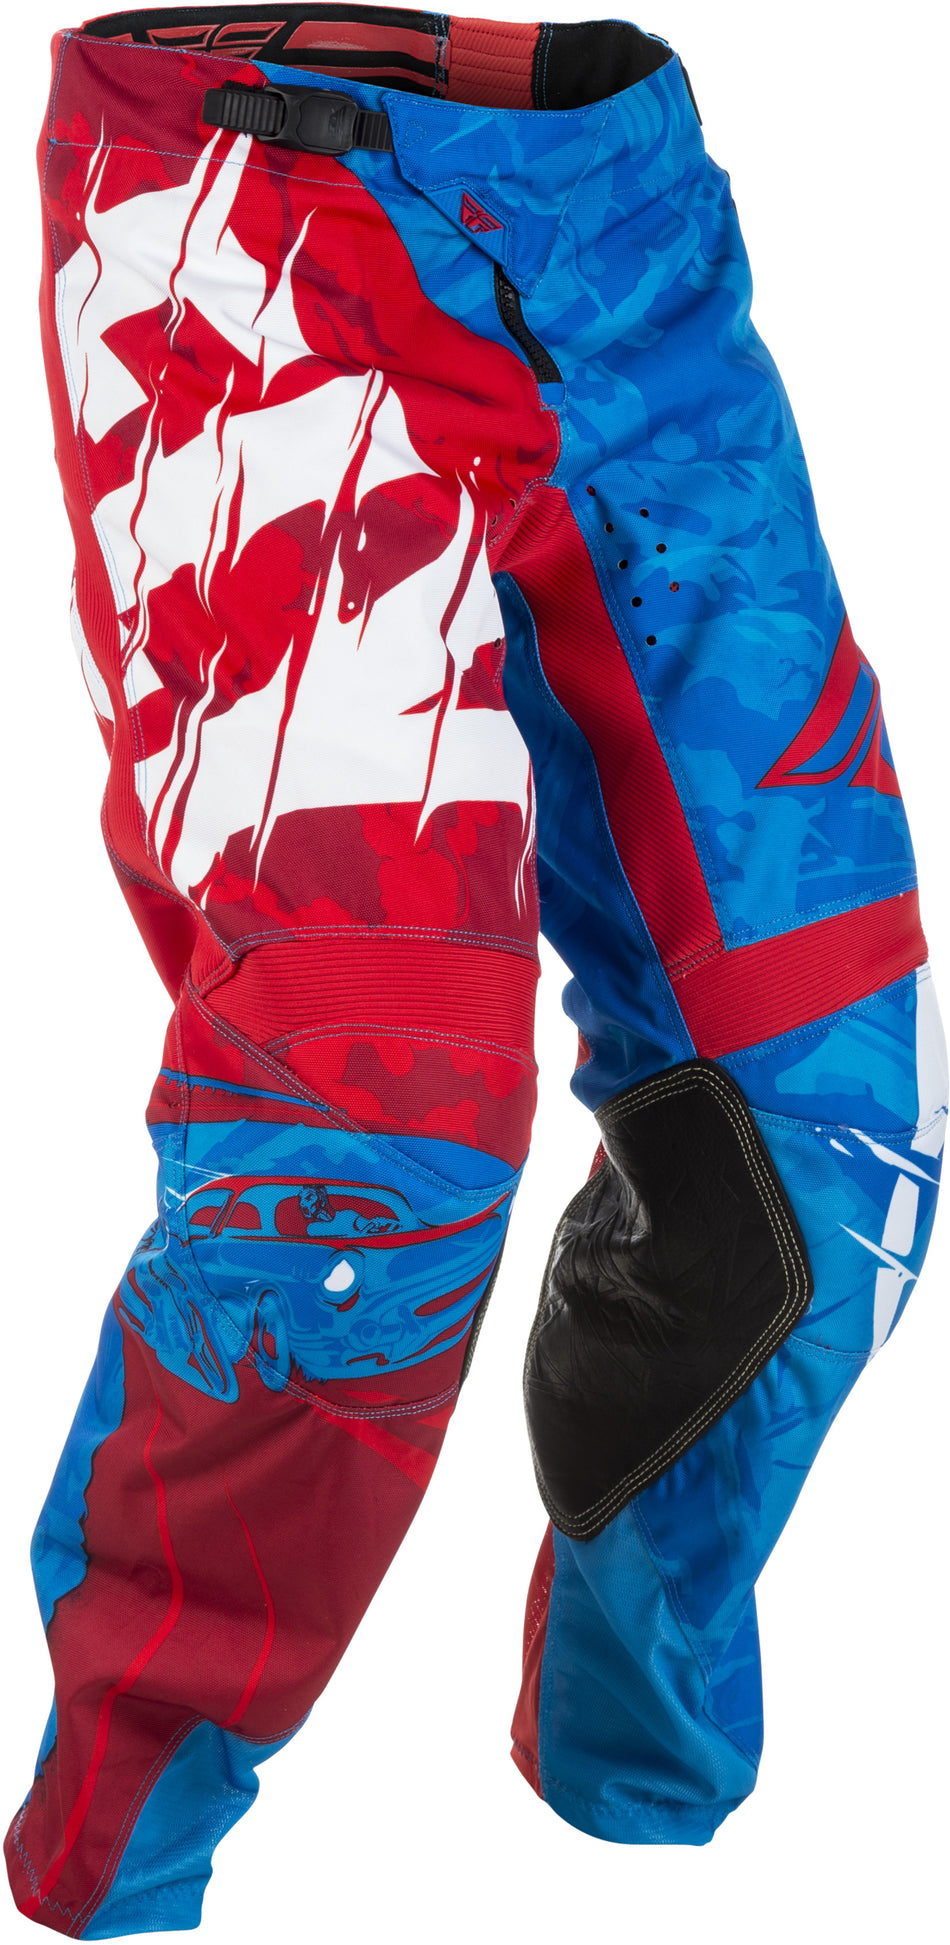 FLY RACING Kinetic Outlaw Pants Red/Blue Sz 30 371-53230